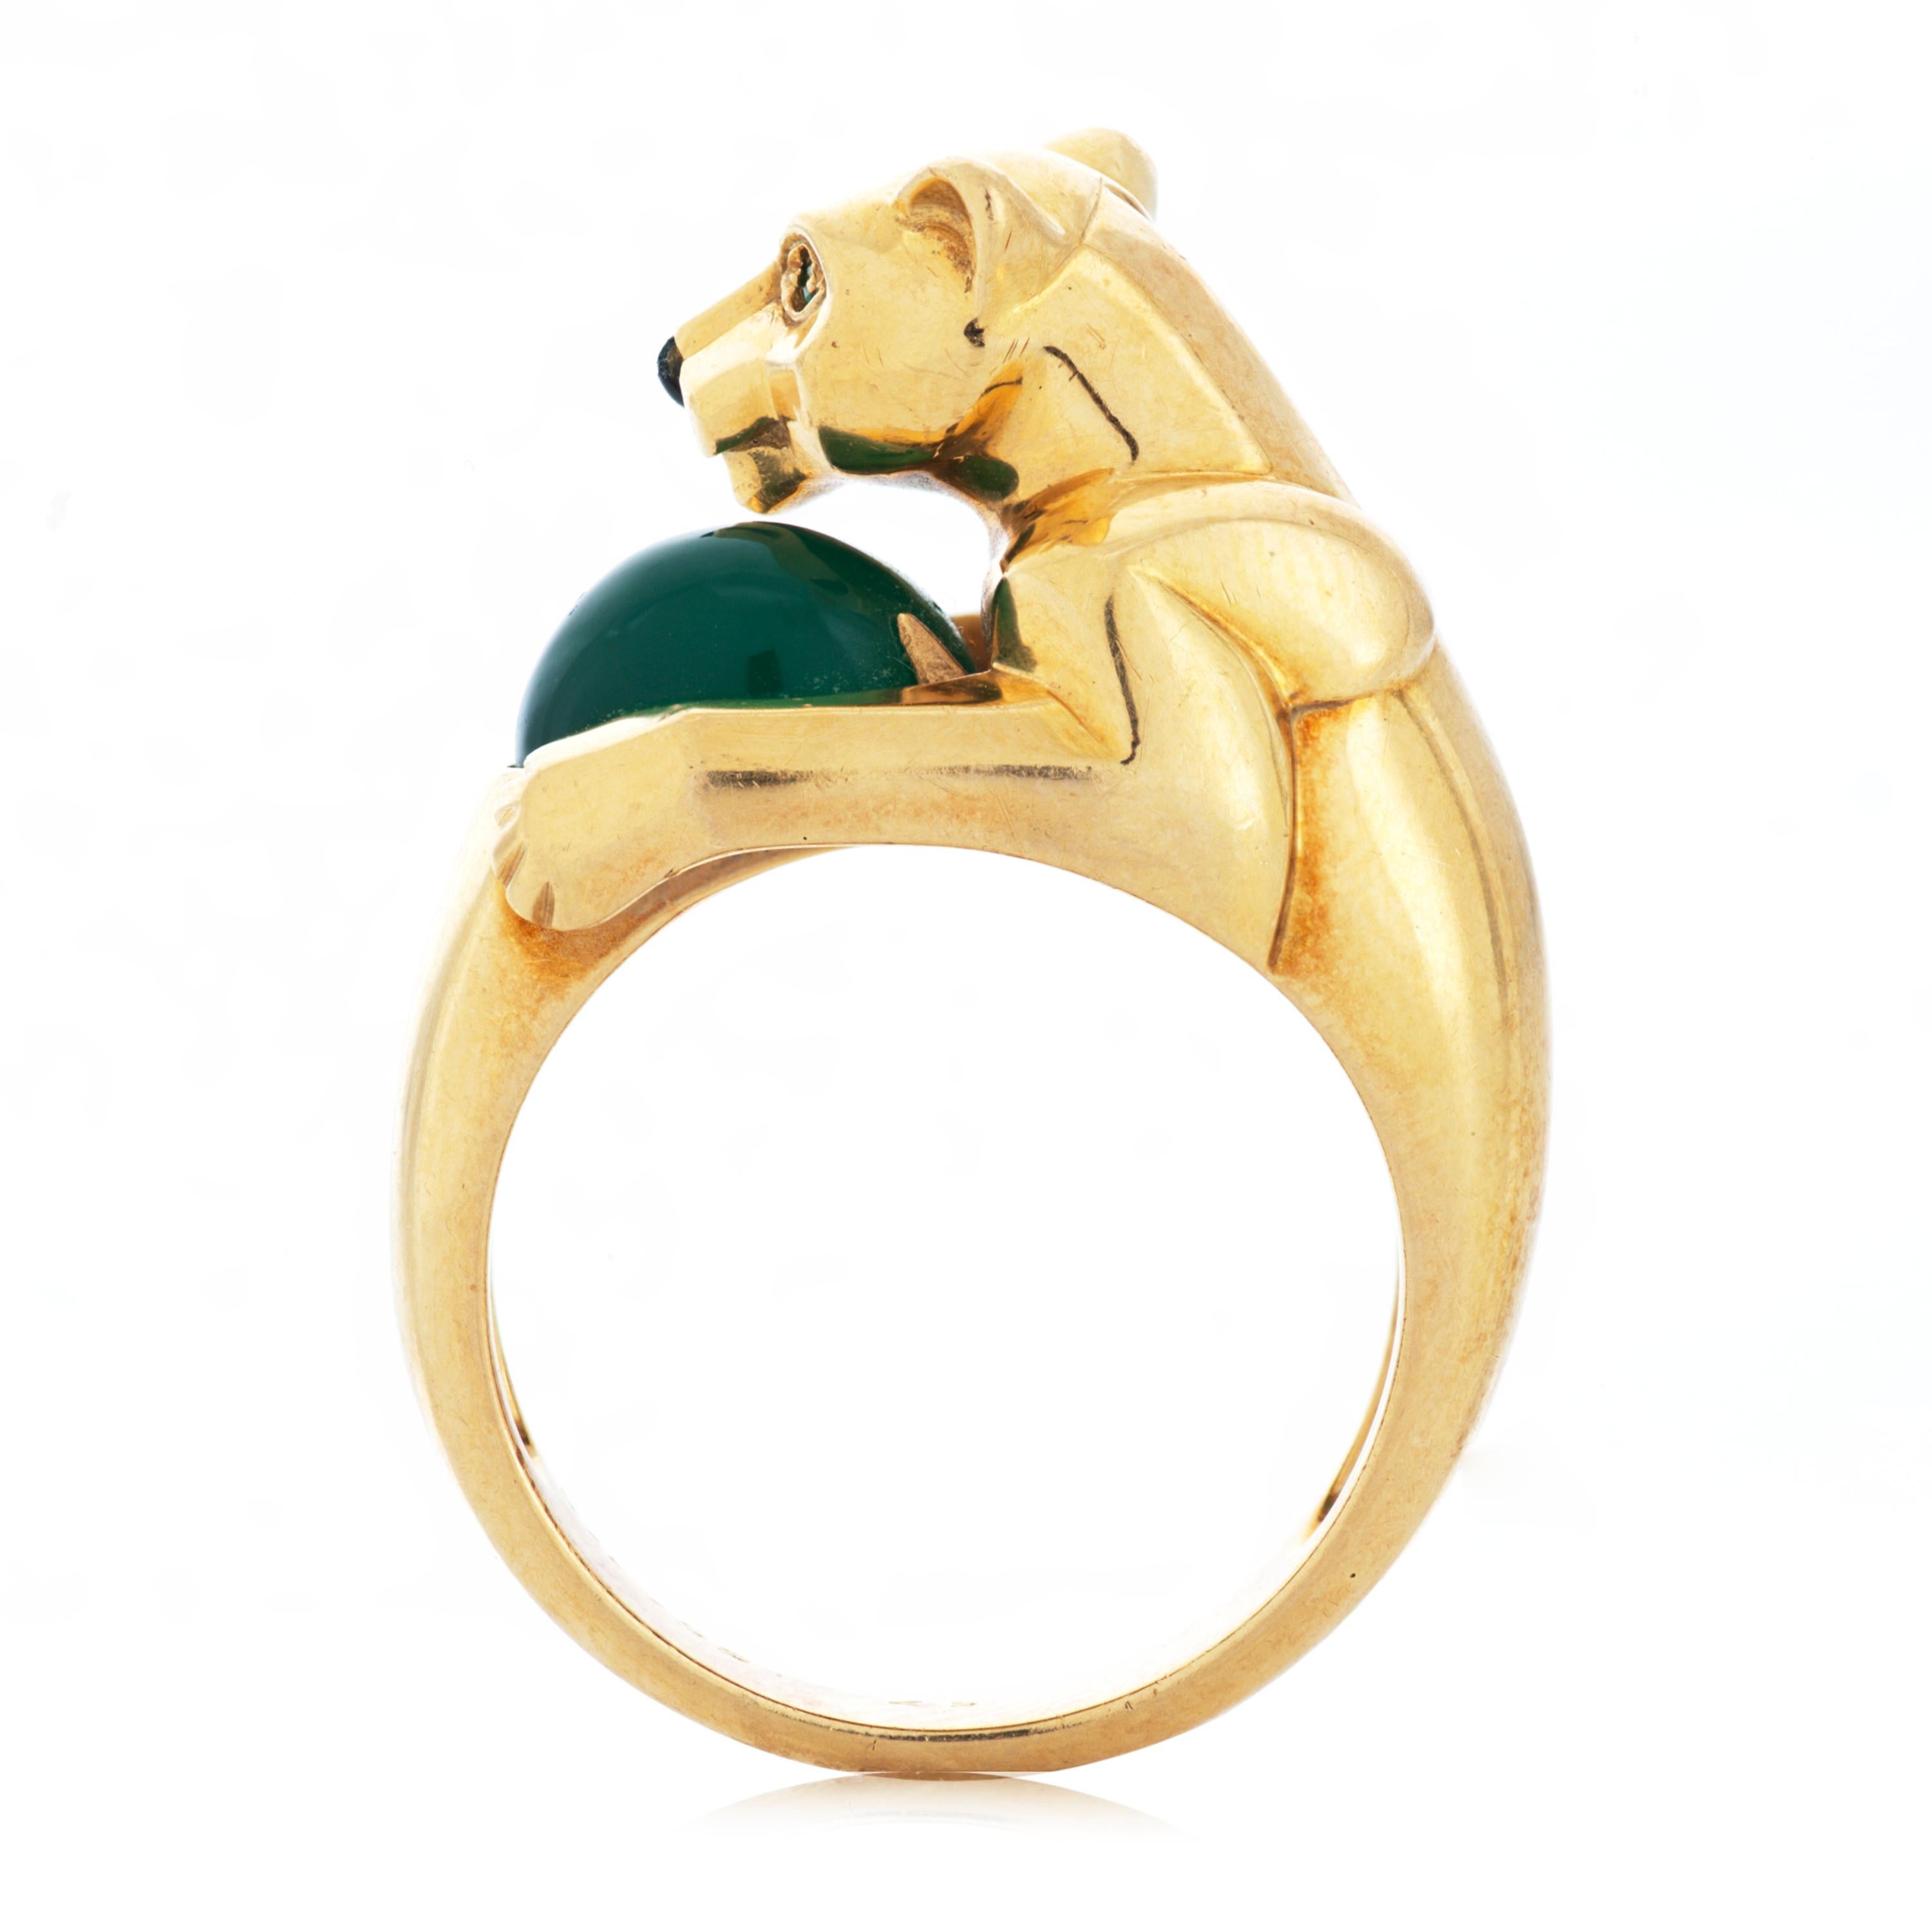 This vintage Panthere De Cartier ring features a panther holding an oval cabochon green chrysoprase.  The panther itself has two round emerald eyes and a carved onyx nose, set in 18k yellow gold.  Accompanied by Cartier box.

The ring measures